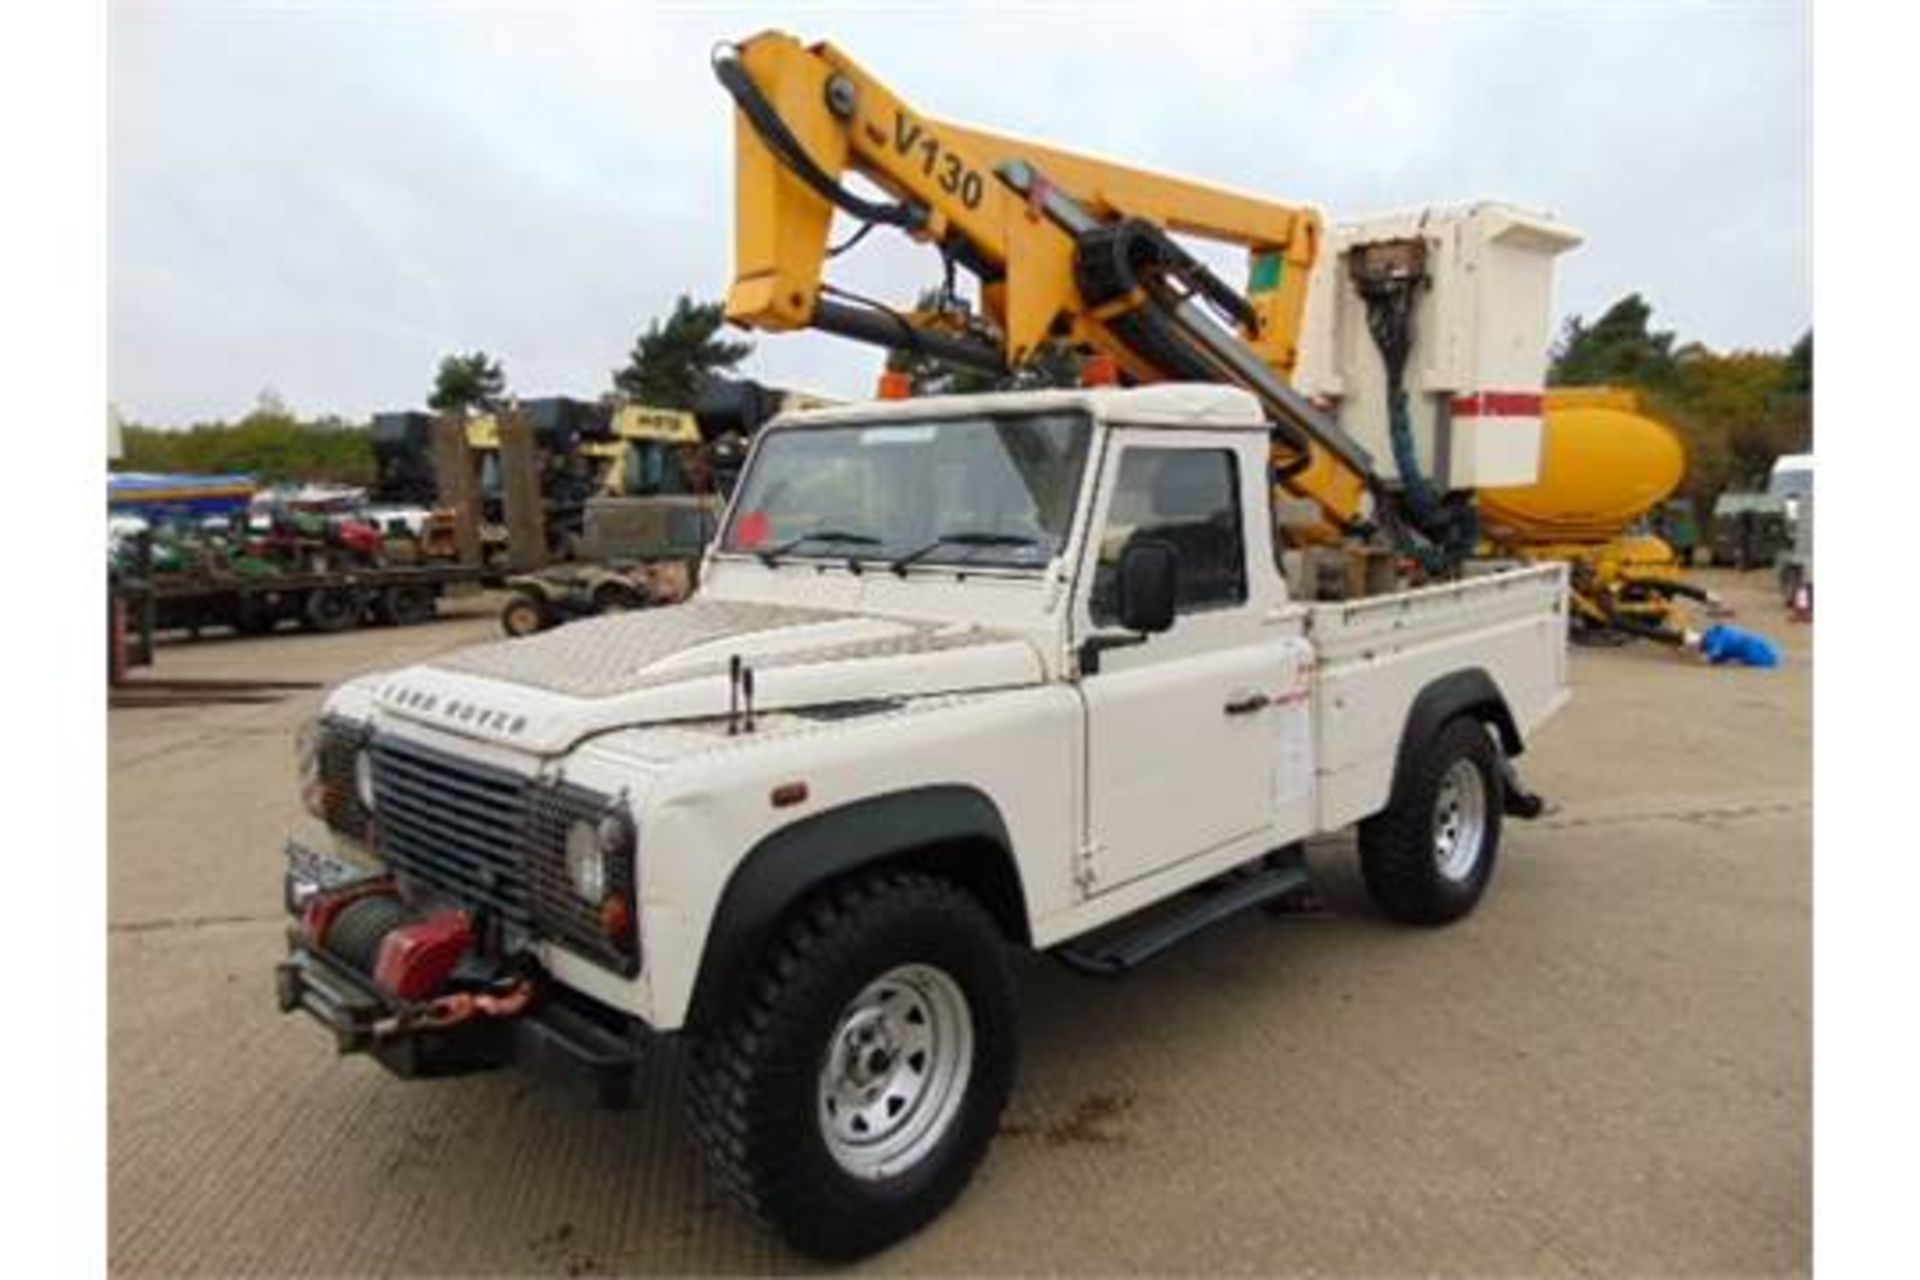 Land Rover Defender 110 High Capacity Cherry Picker - Image 6 of 34